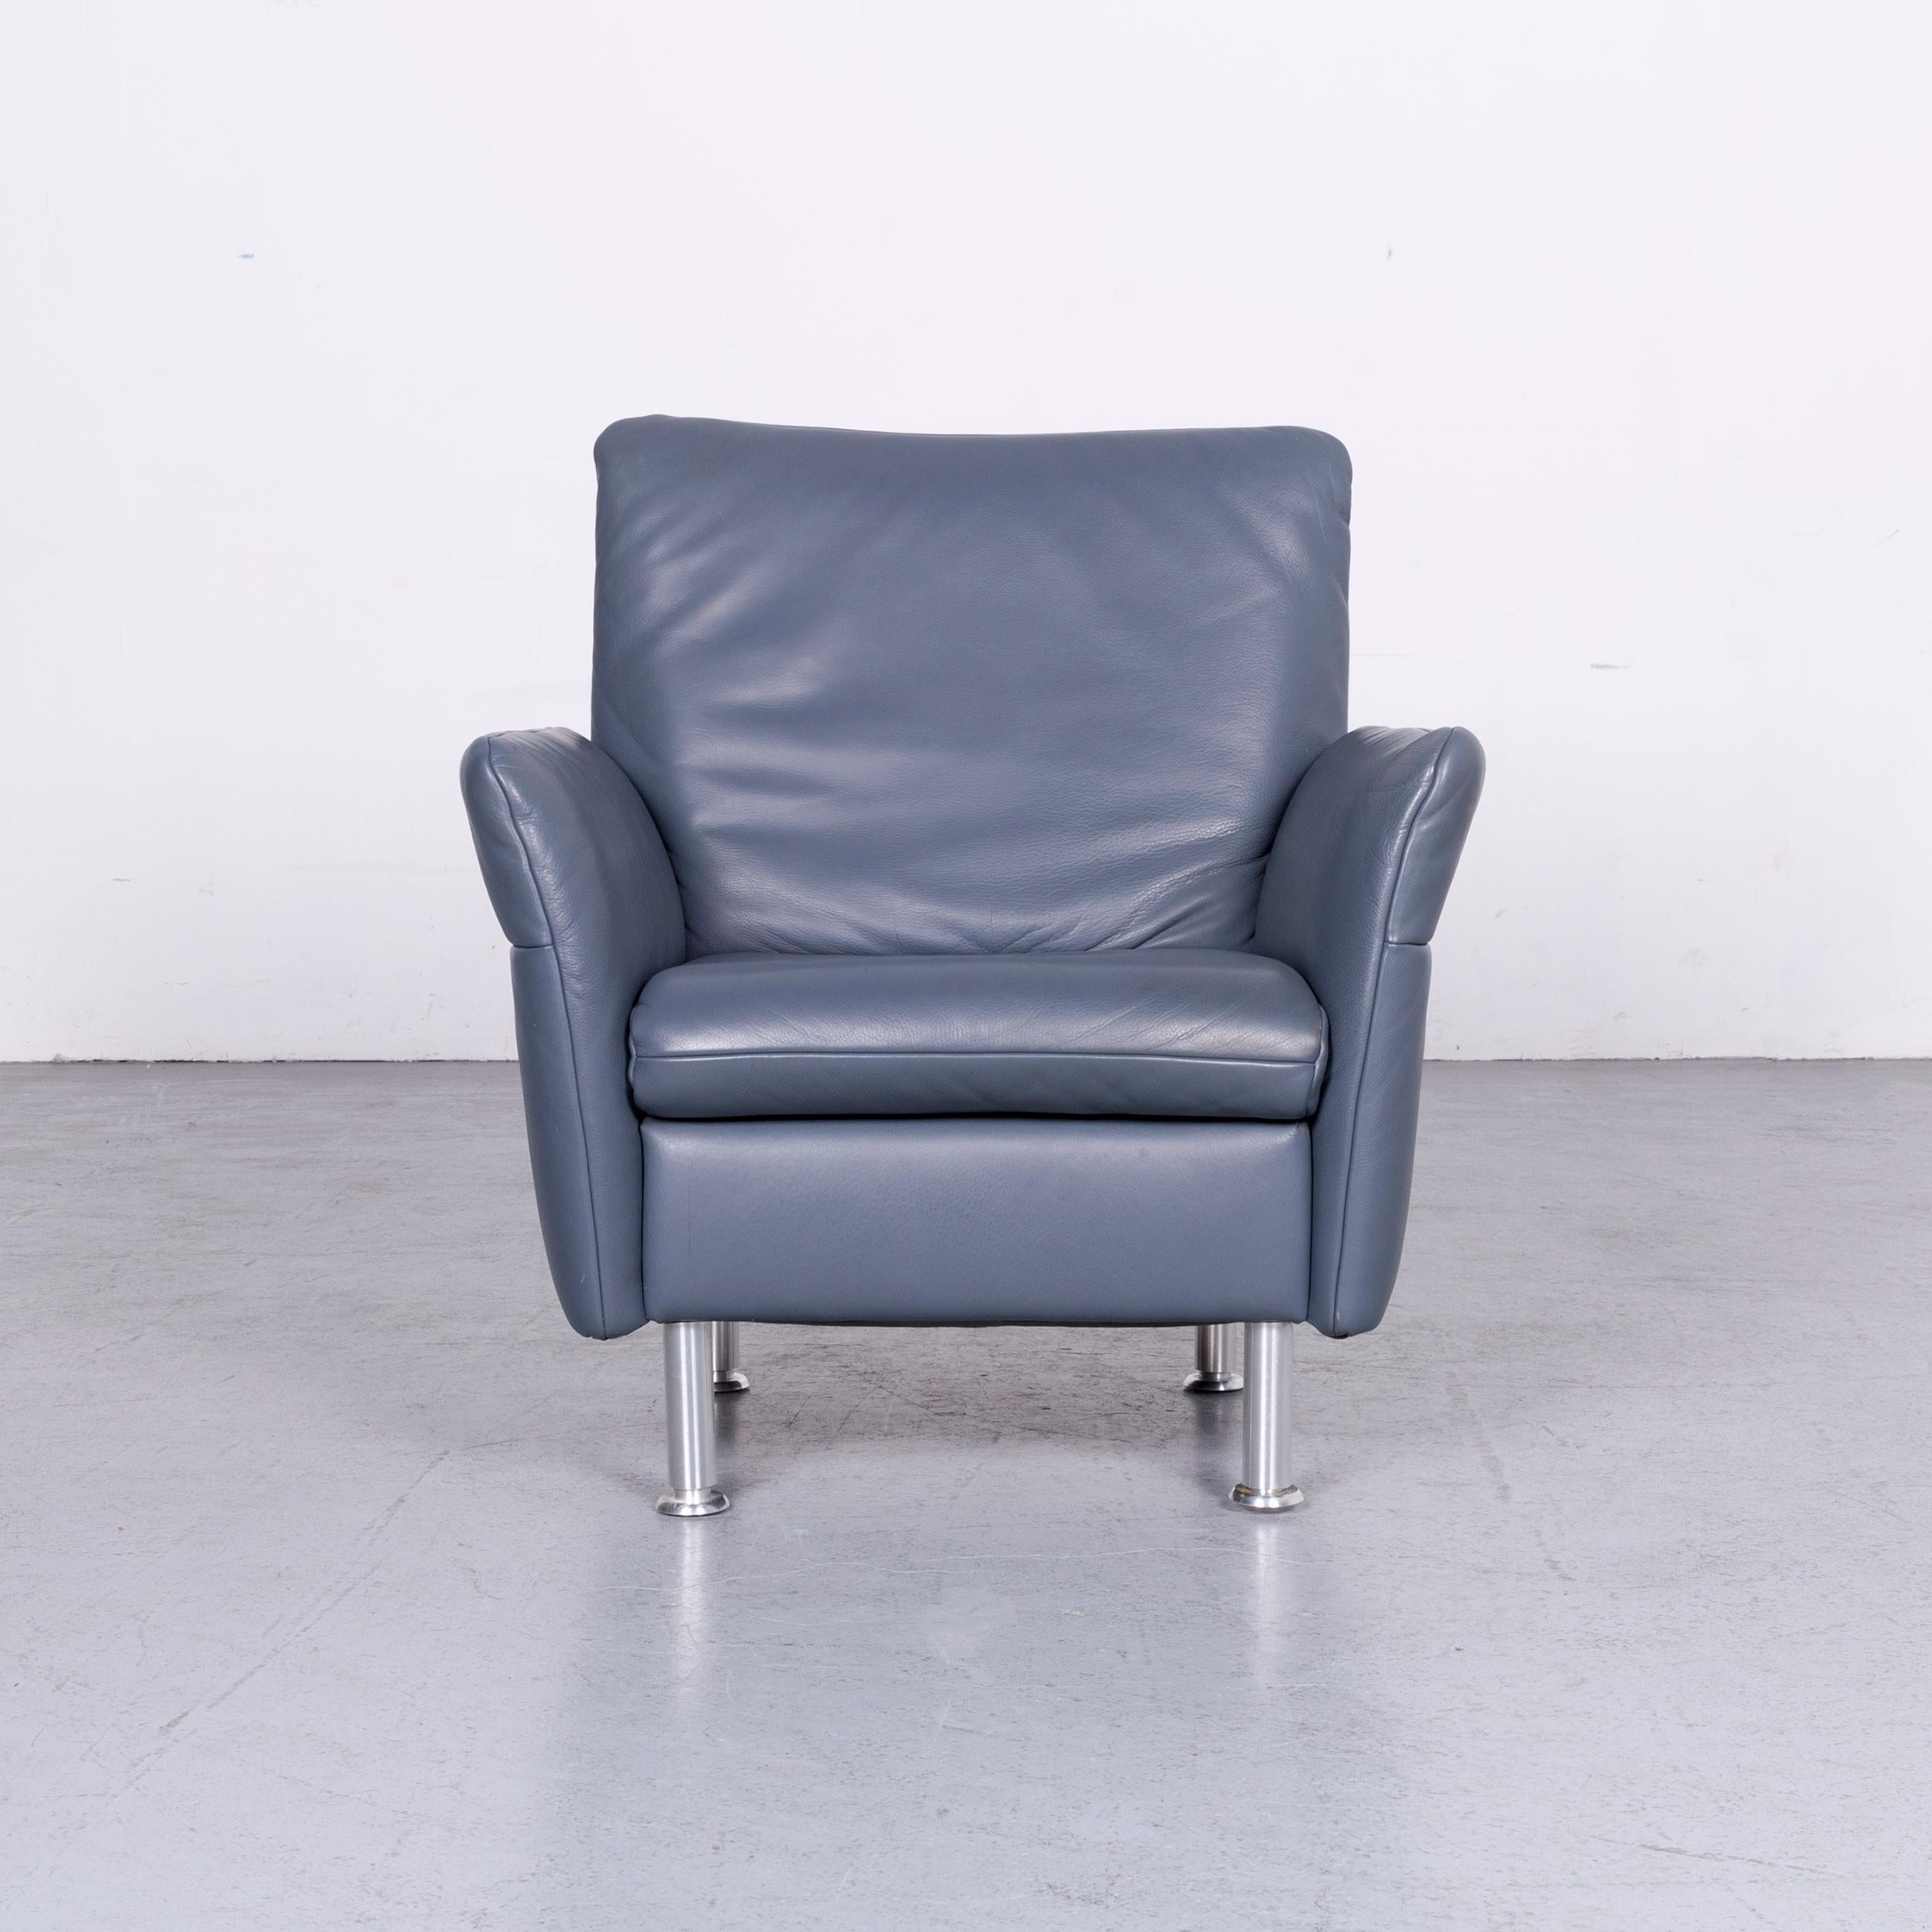 We bring to you a Koinor designer one-seat sofa blue leather armchair.